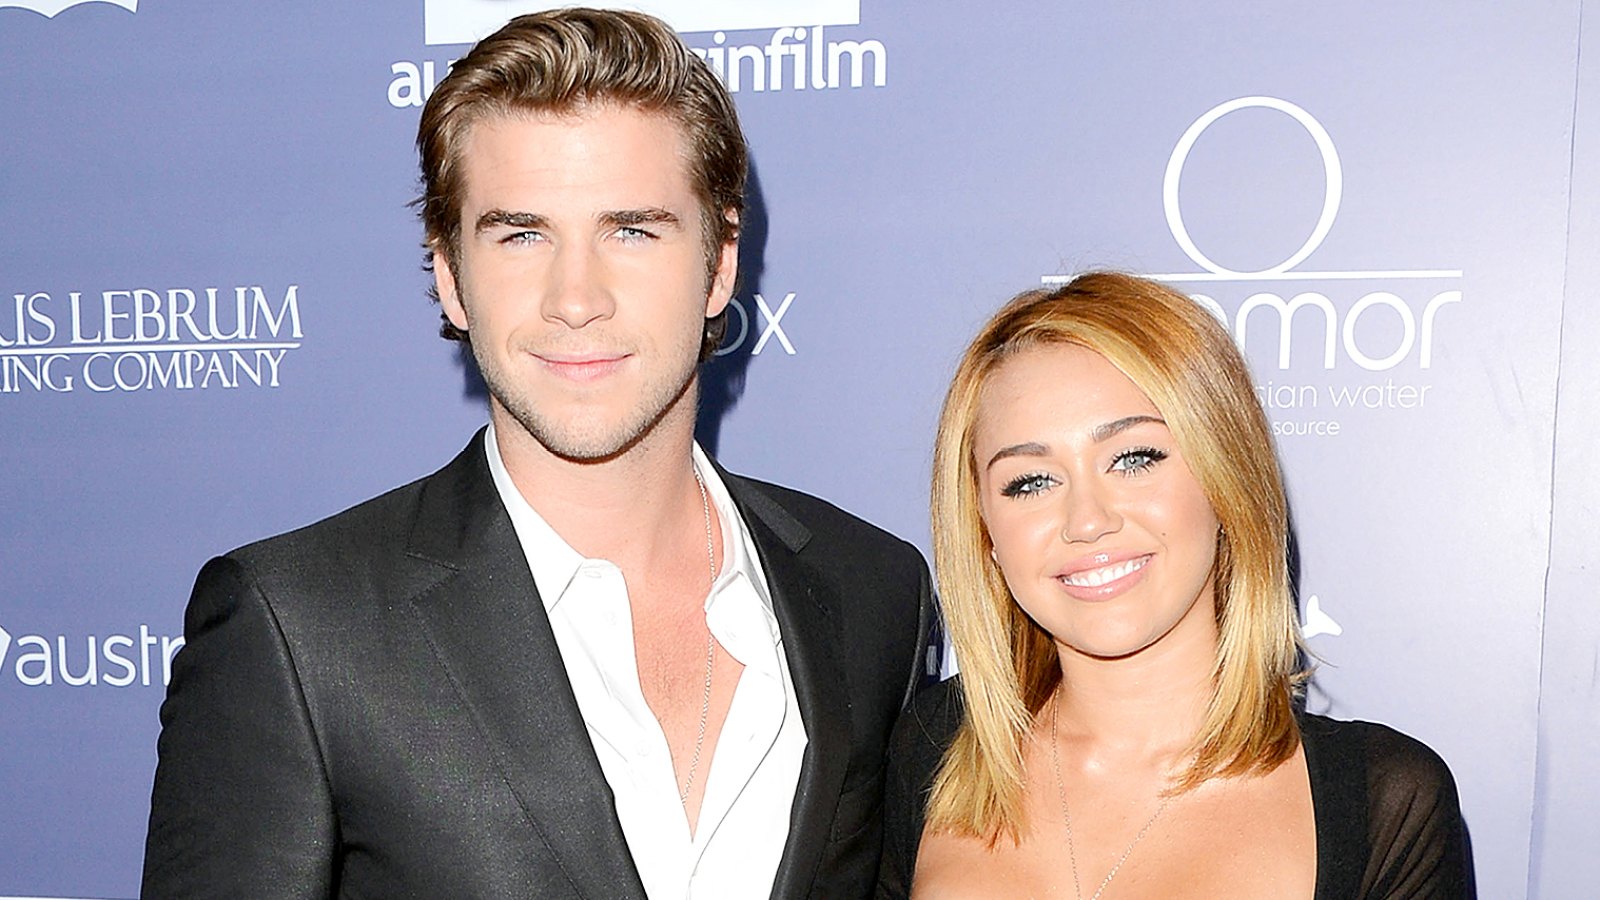 Liam Hemsworth and Miley Cyrus arrive at Australians In Film Awards & Benefit Dinner at InterContinental Hotel on June 27, 2012.